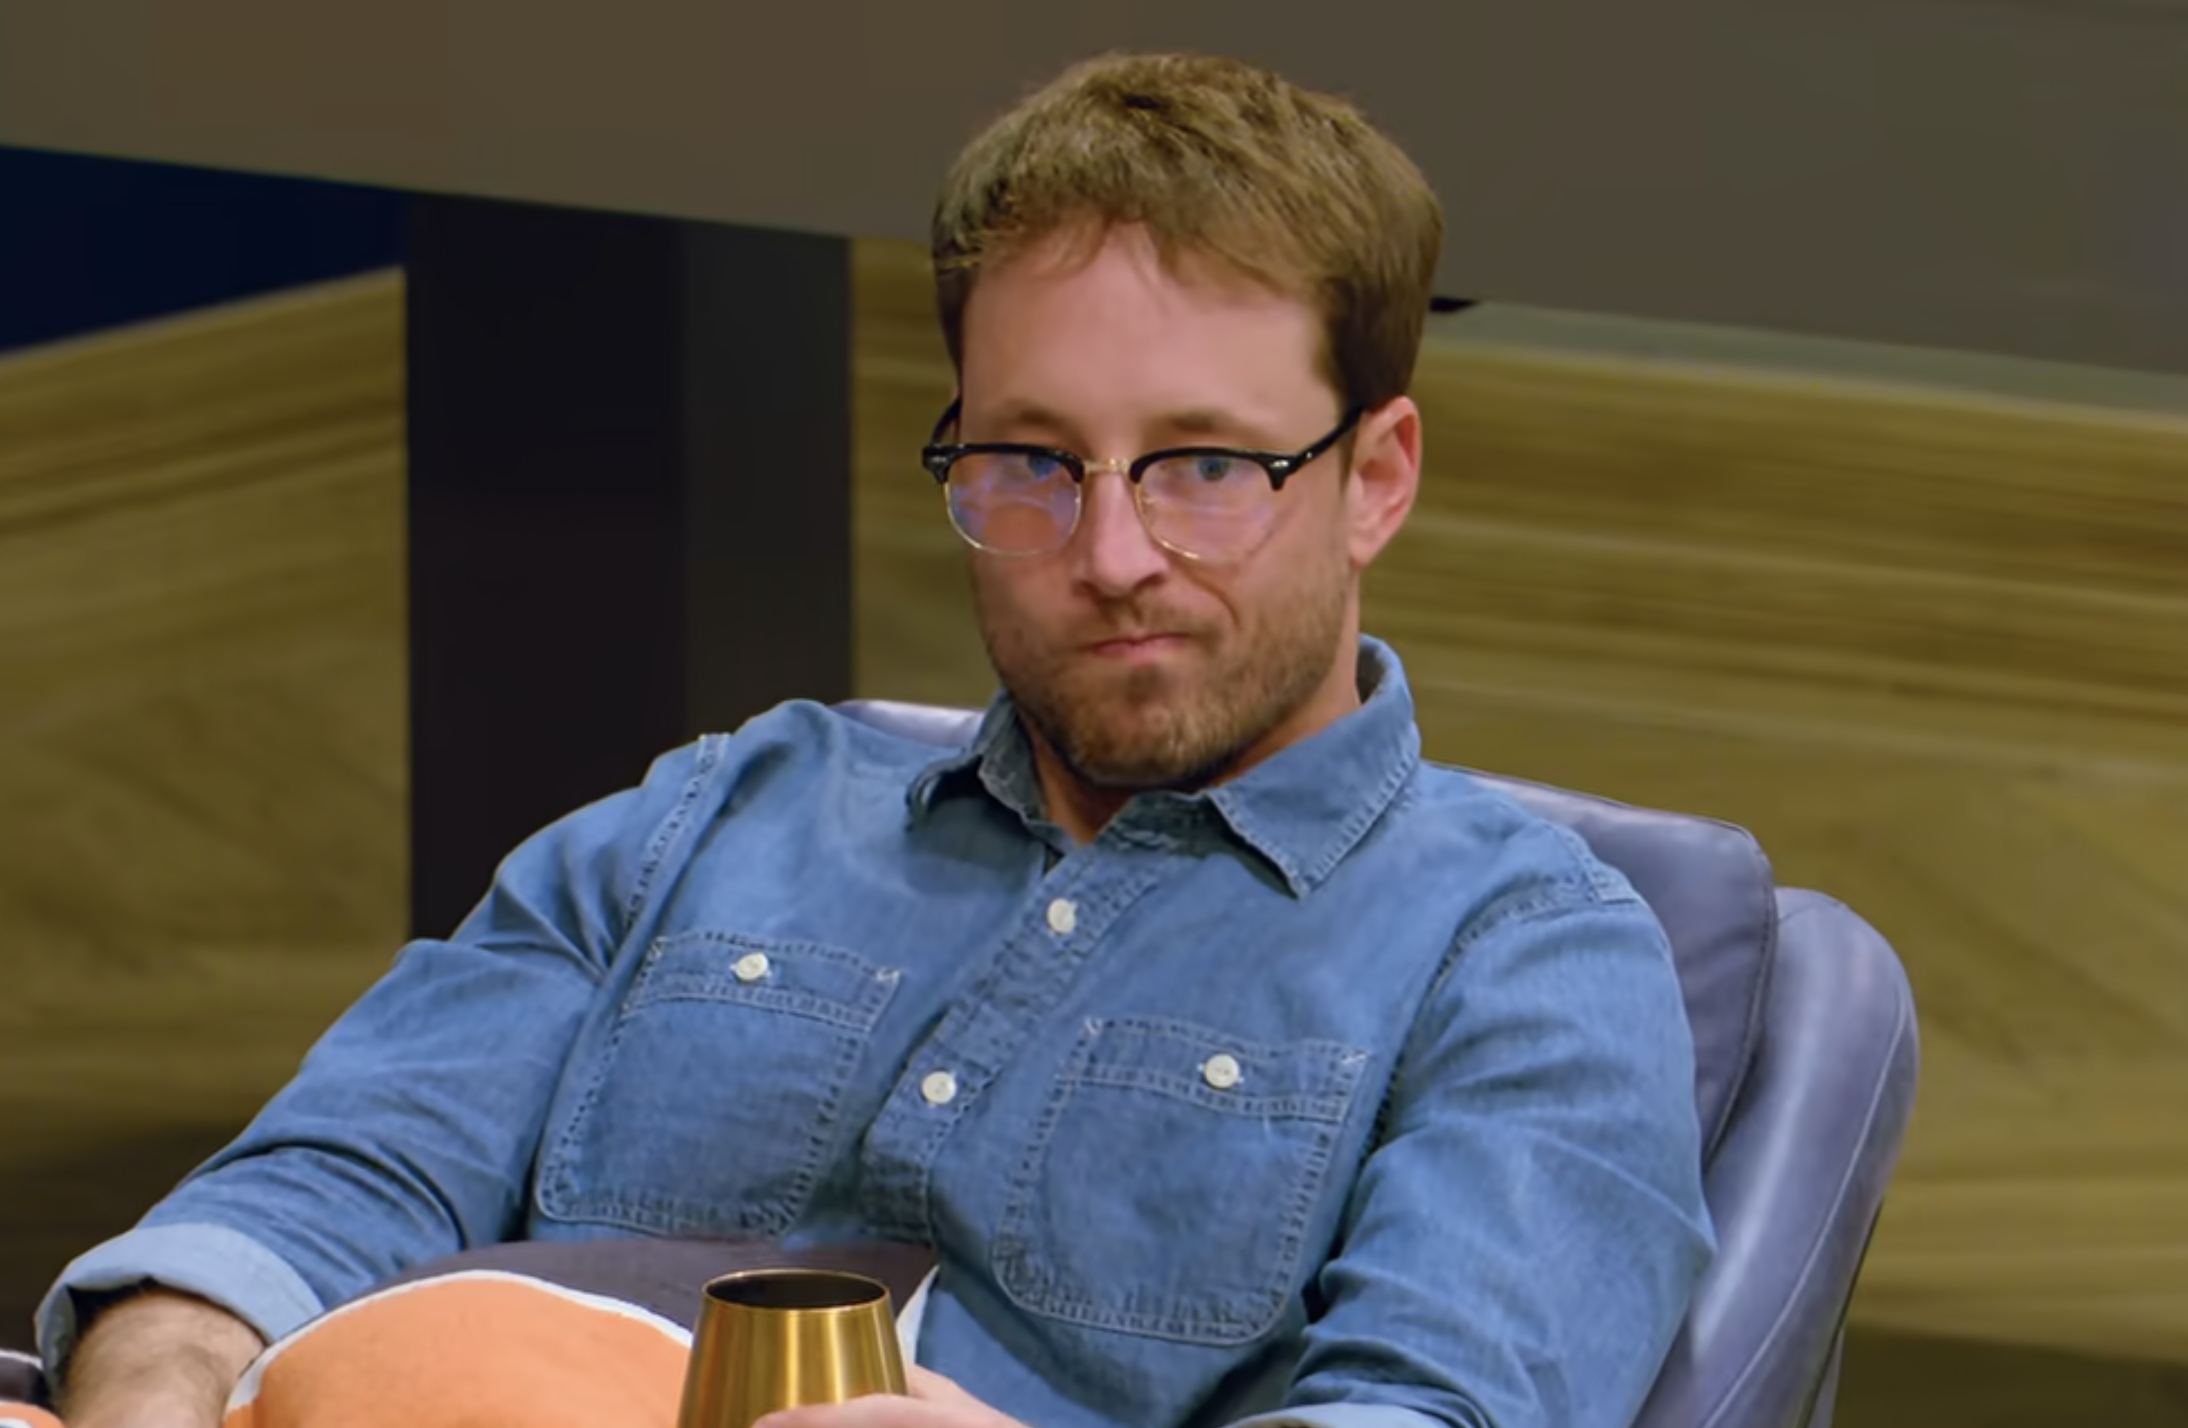 Jeremy in a denim shirt sitting with a cup, looking off into the distance